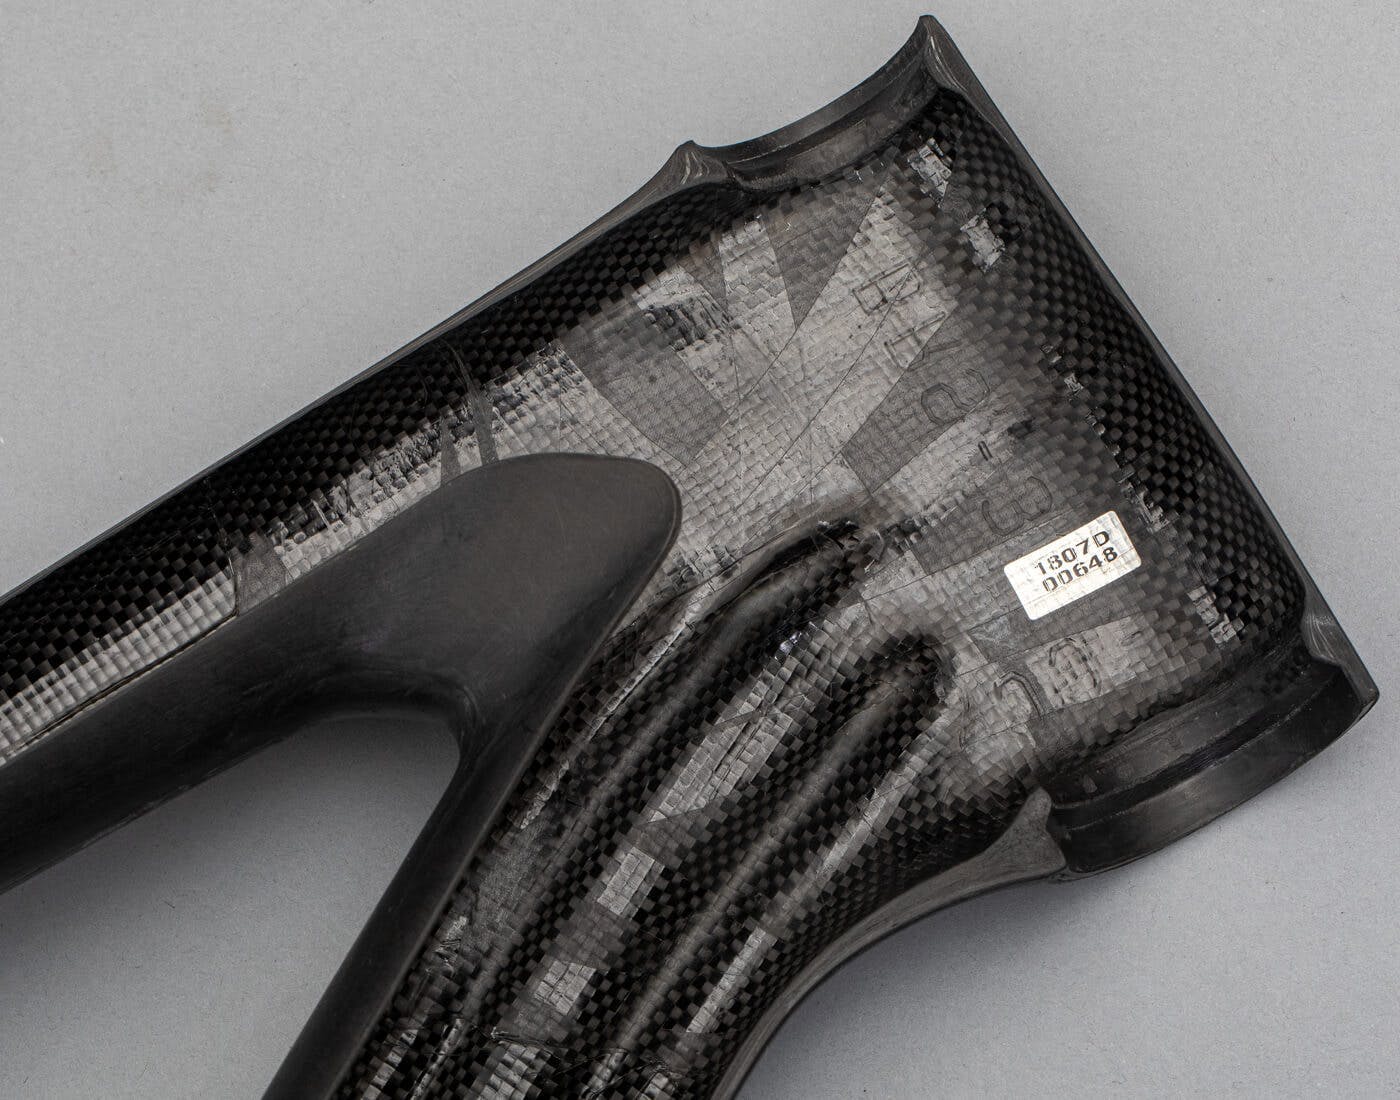 A carbon bicycle frame cut in half to expose the inner carbon cable routing